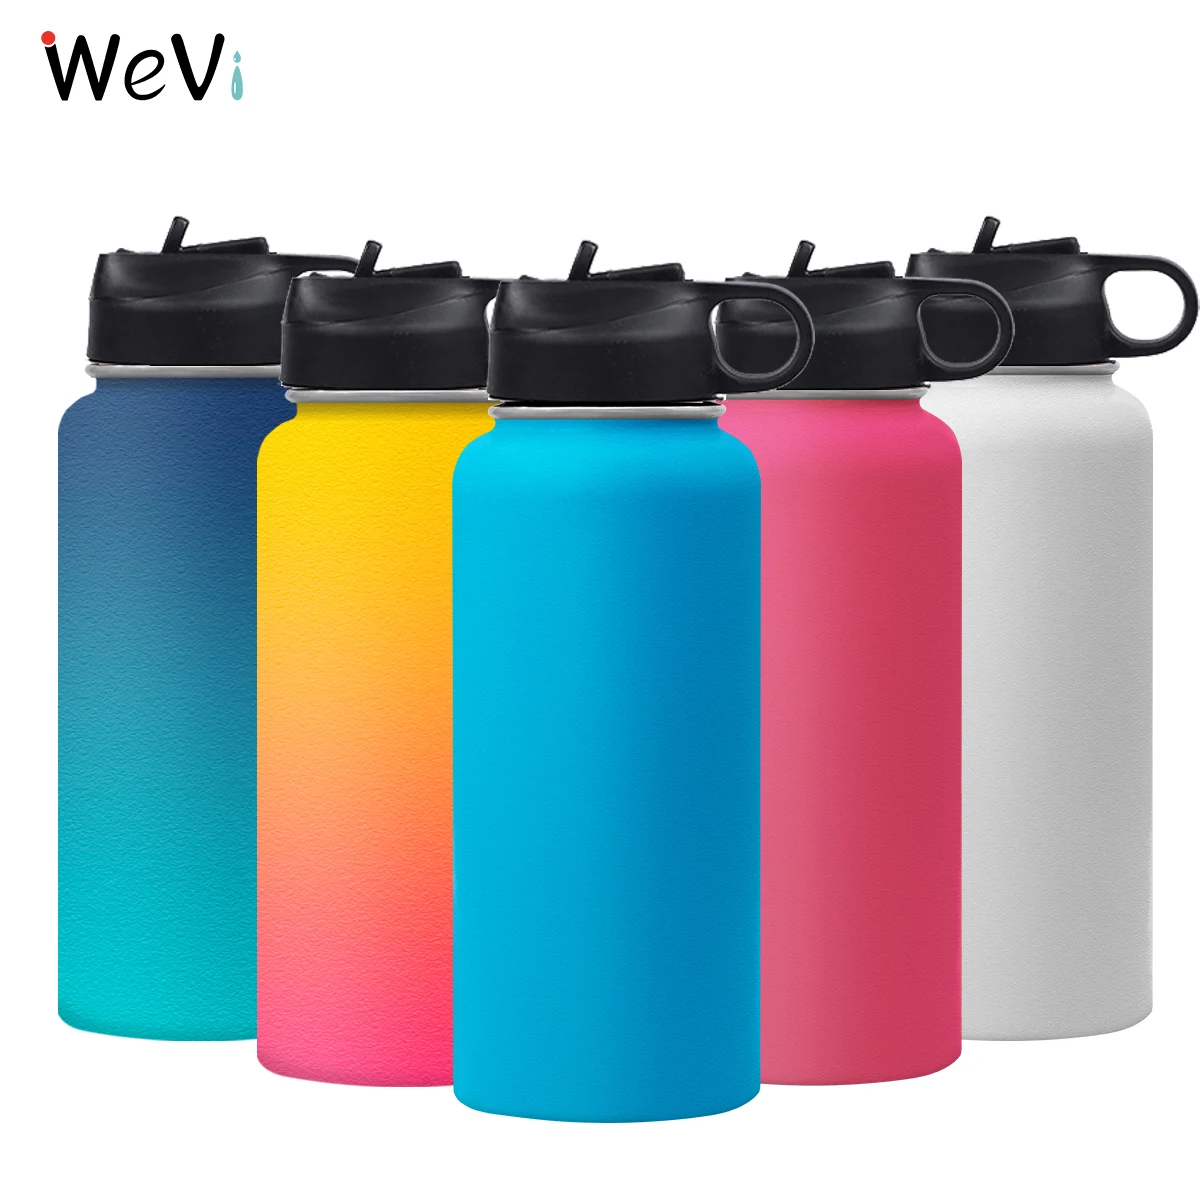 

WeVi Hot sale double wall vaccum insulated stainless steel sport water bottle bottle